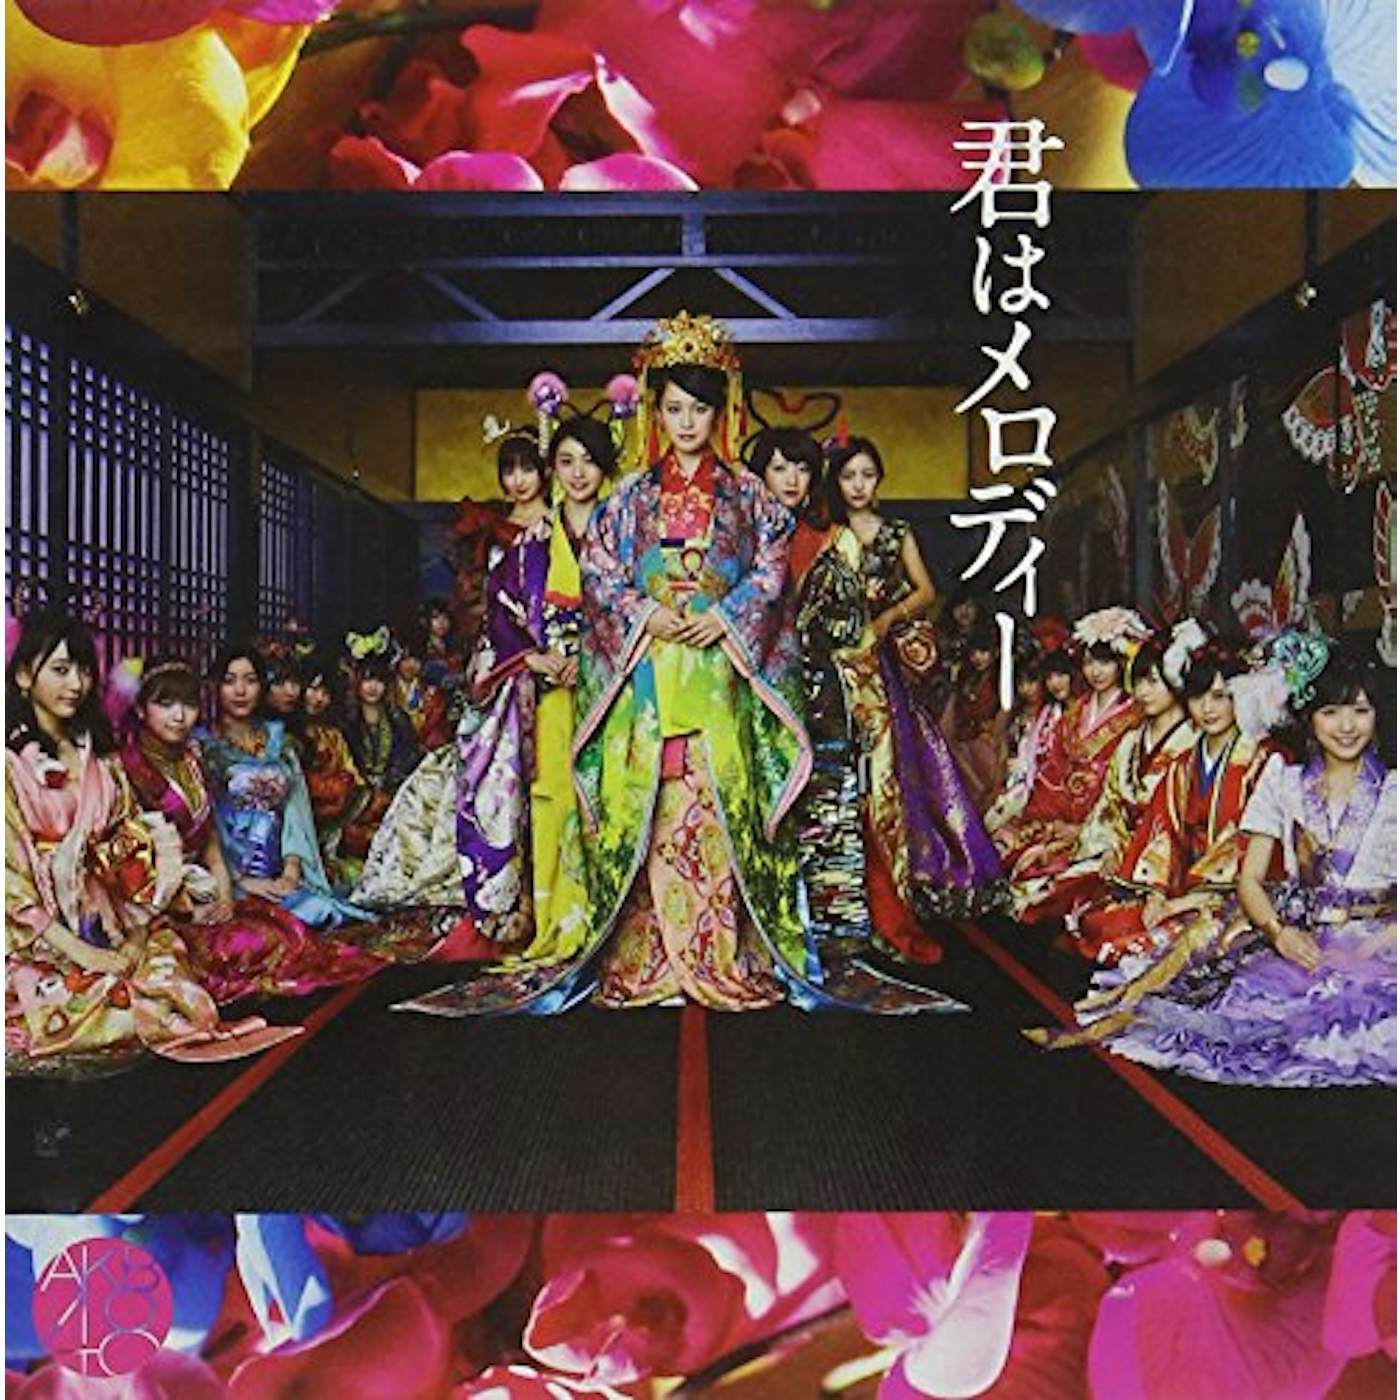 AKB48 KIMI HA MELODY: DELUXE VERSION A CD